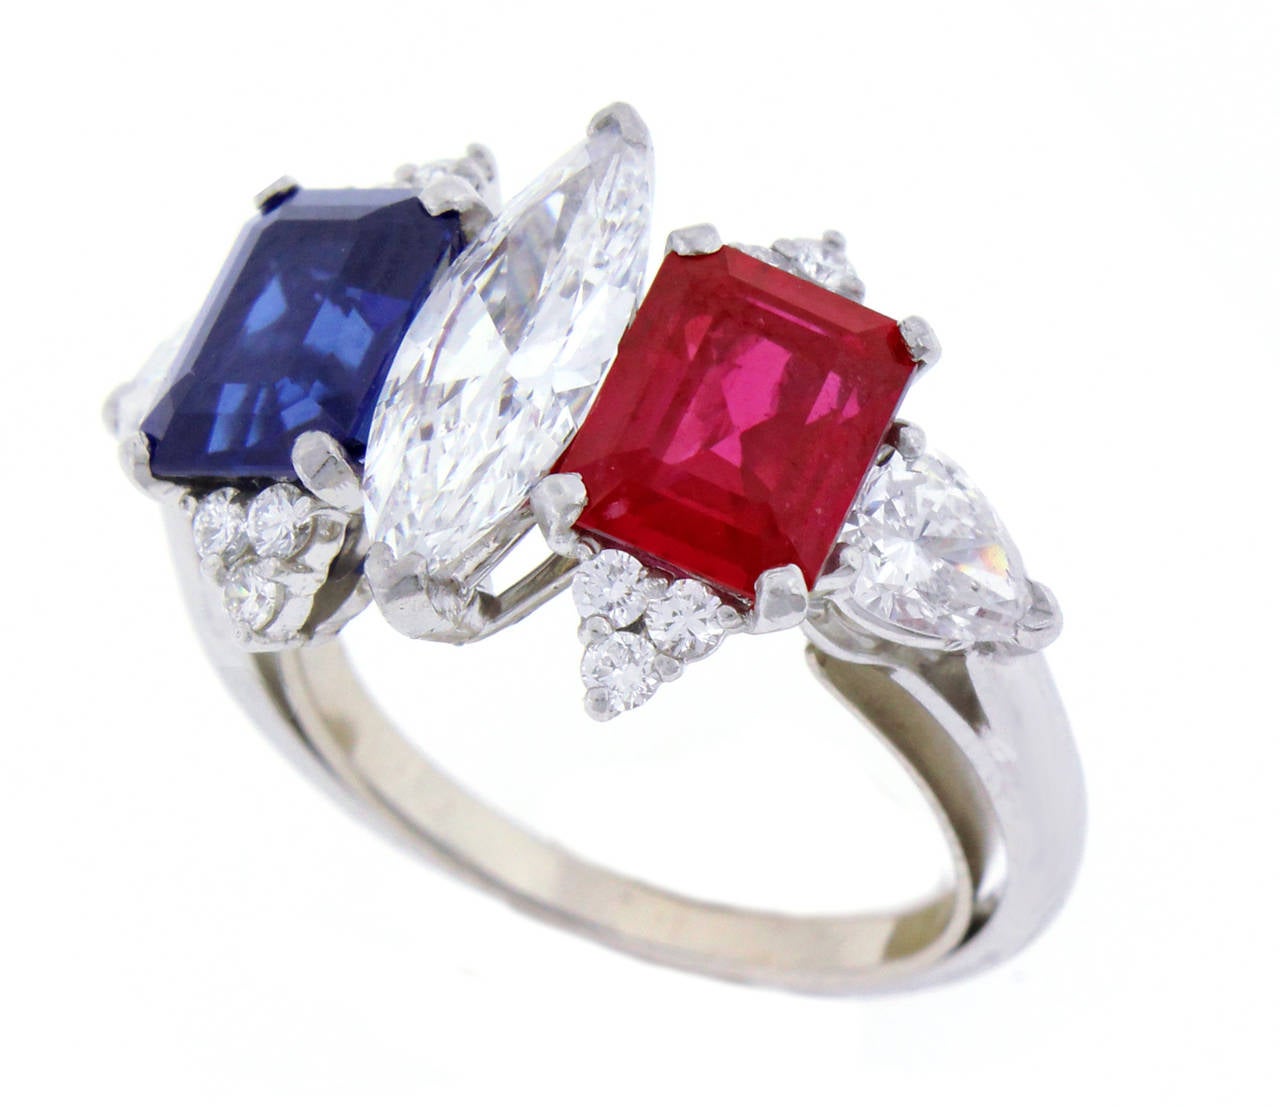 This magnificent ring features a center marquise diamond weighing 1.05 carats. The diamond is  D color and VVS clarity.

The Ruby weighs 1.71 carats and is un-heated from Burma. The ruby is crystalline and exceeding fine.

The Sapphire weighs